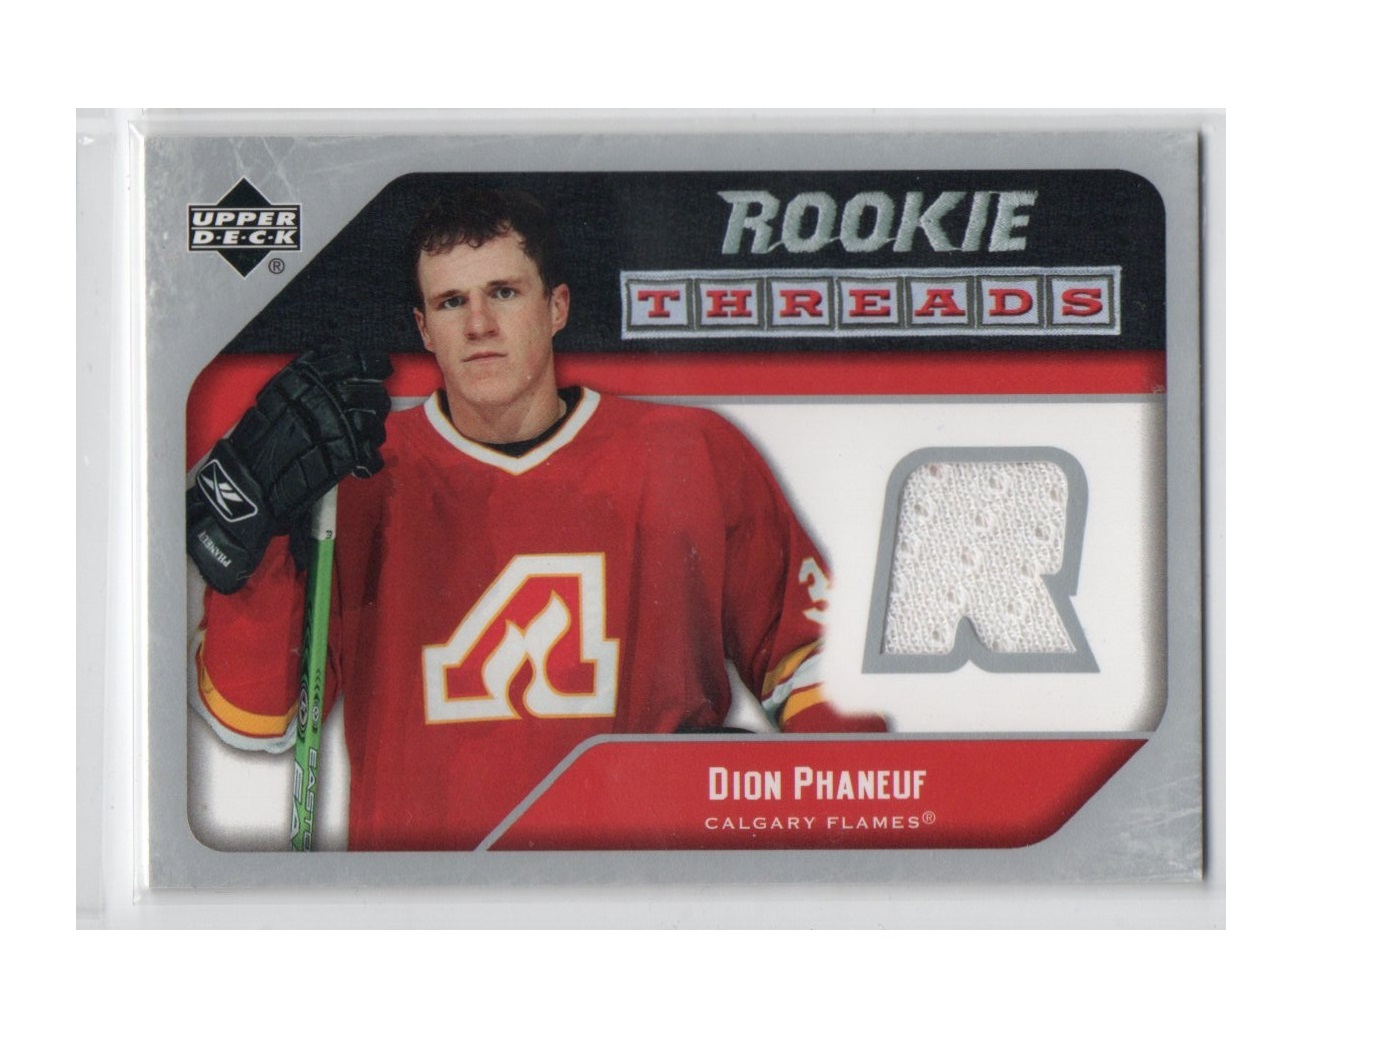 2005-06 Upper Deck Rookie Threads #RTDP Dion Phaneuf (30-X229-GAMEUSED-RC-FLAMES)